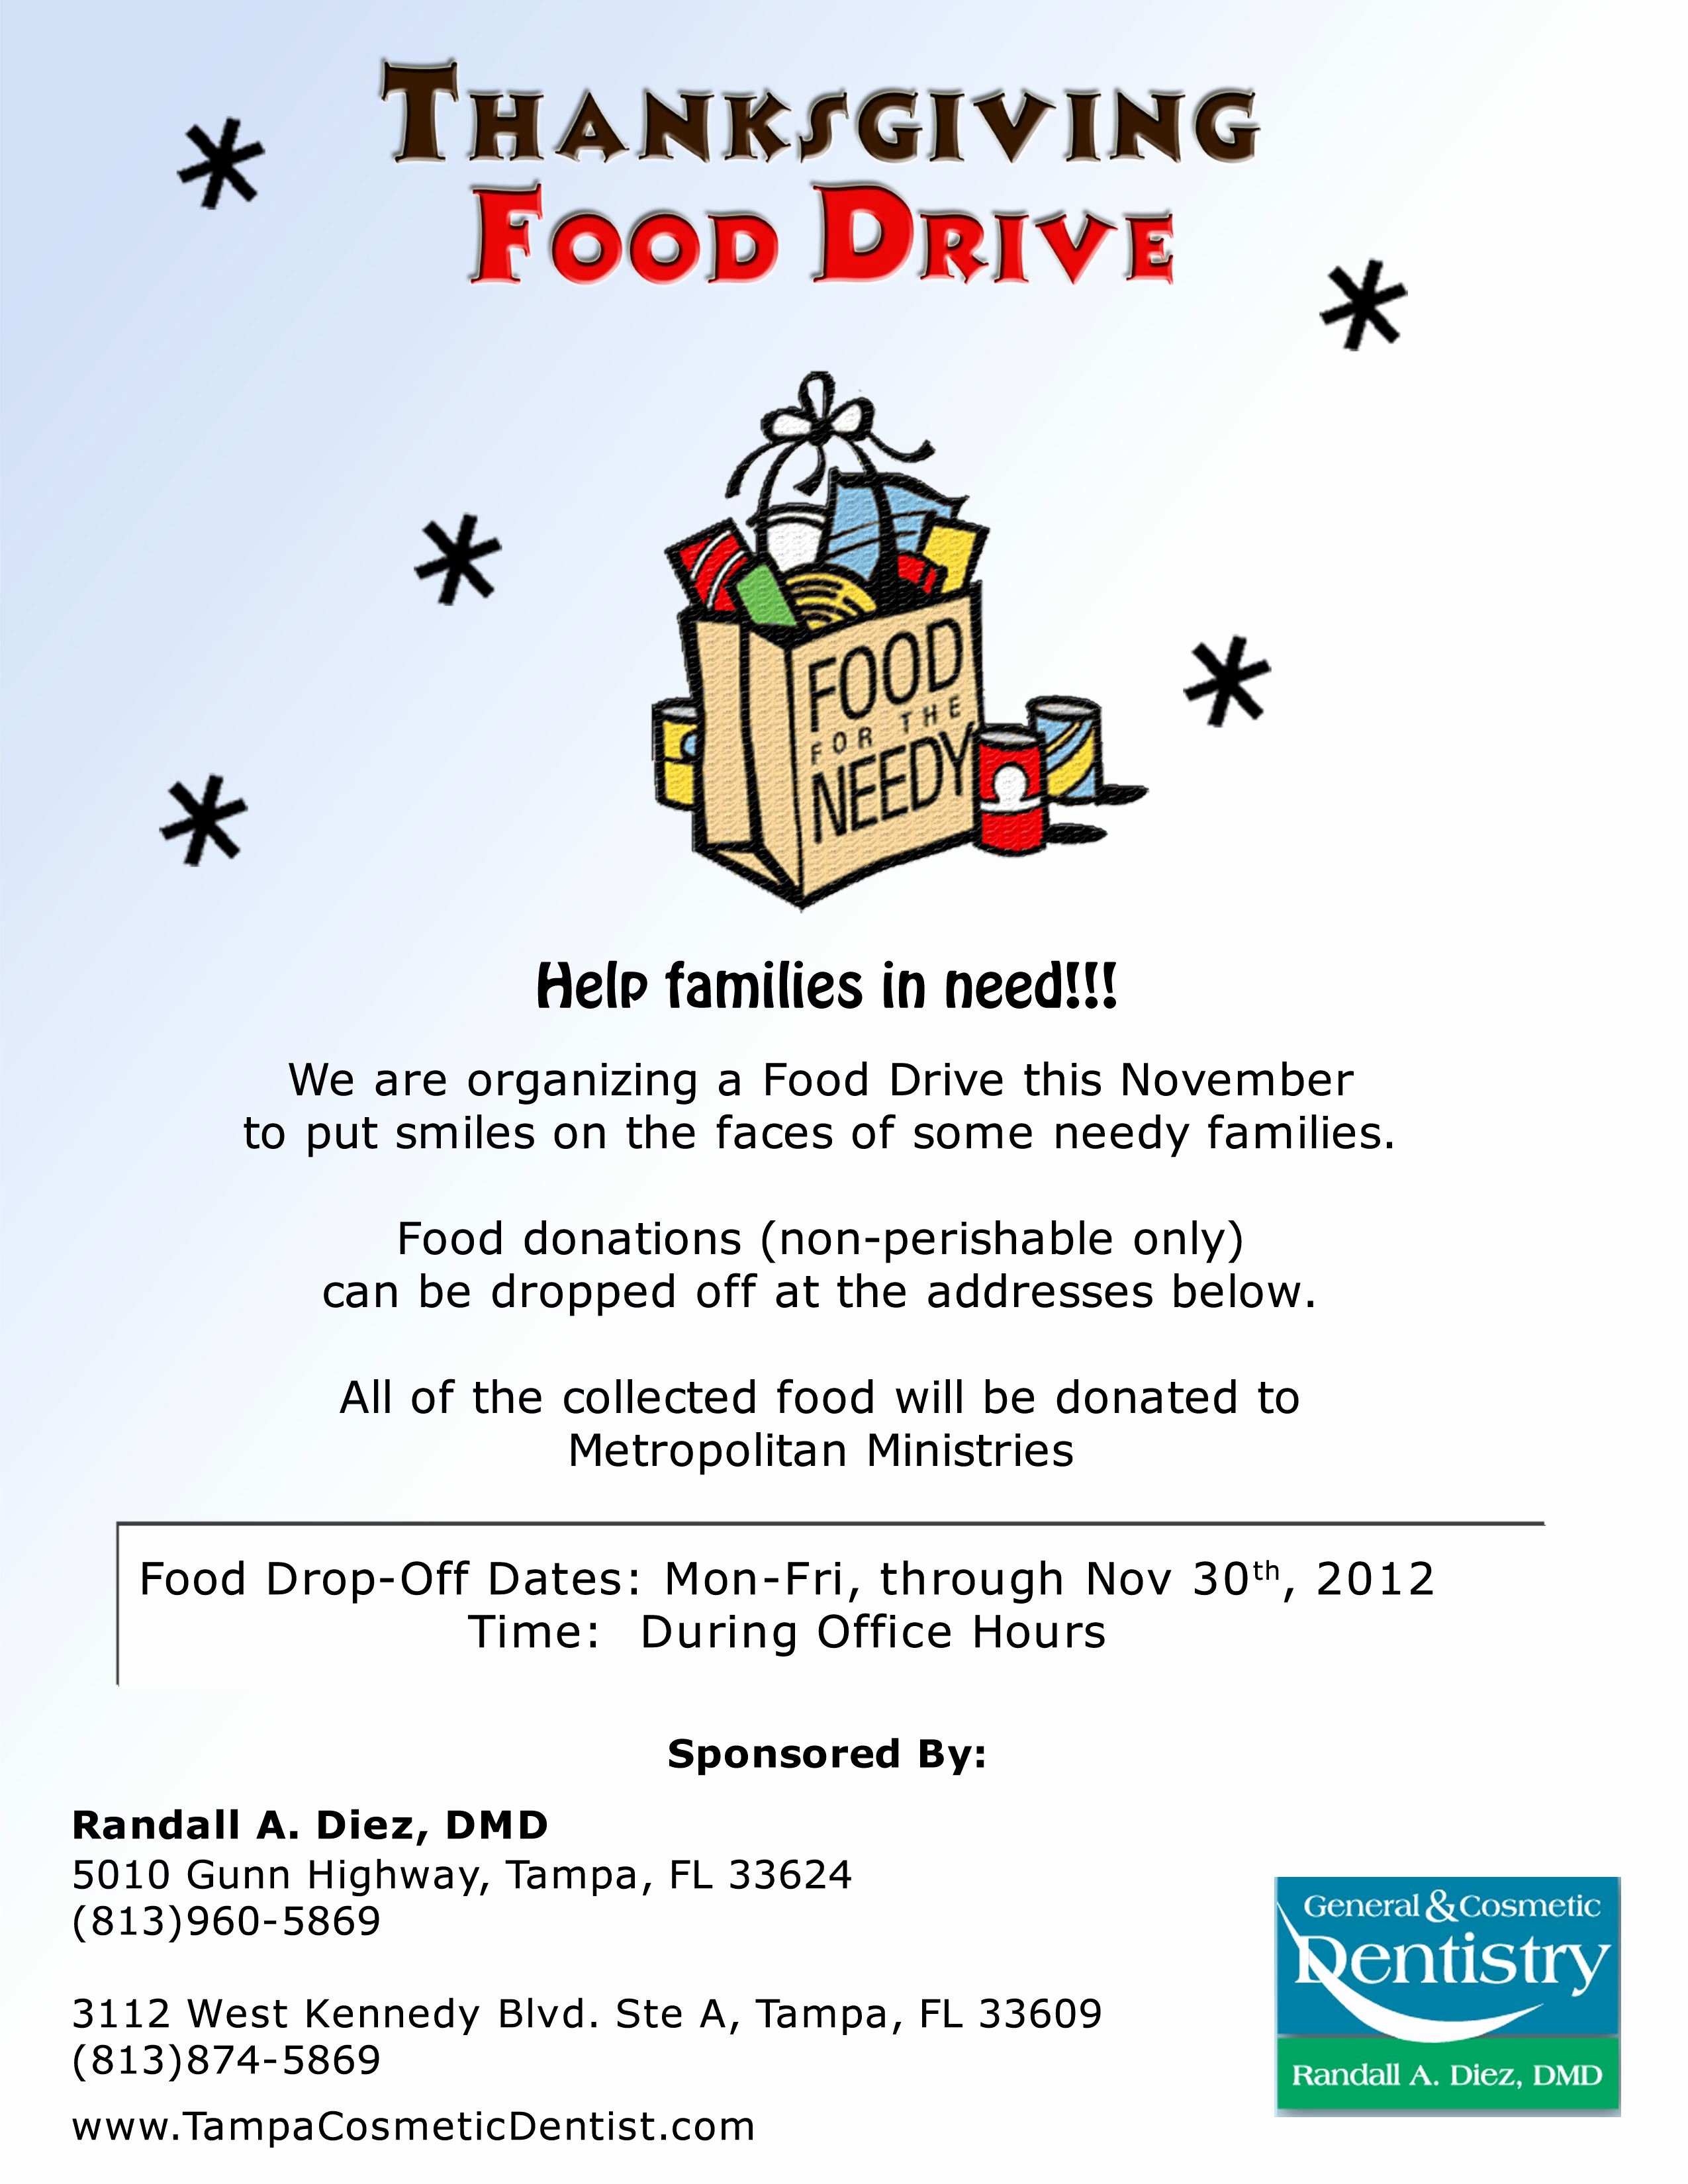 Food Drive Flyer Ideas Fresh Thanksgiving Food Drive During the Month Of November Donate Canned Food Goods to Our Office and